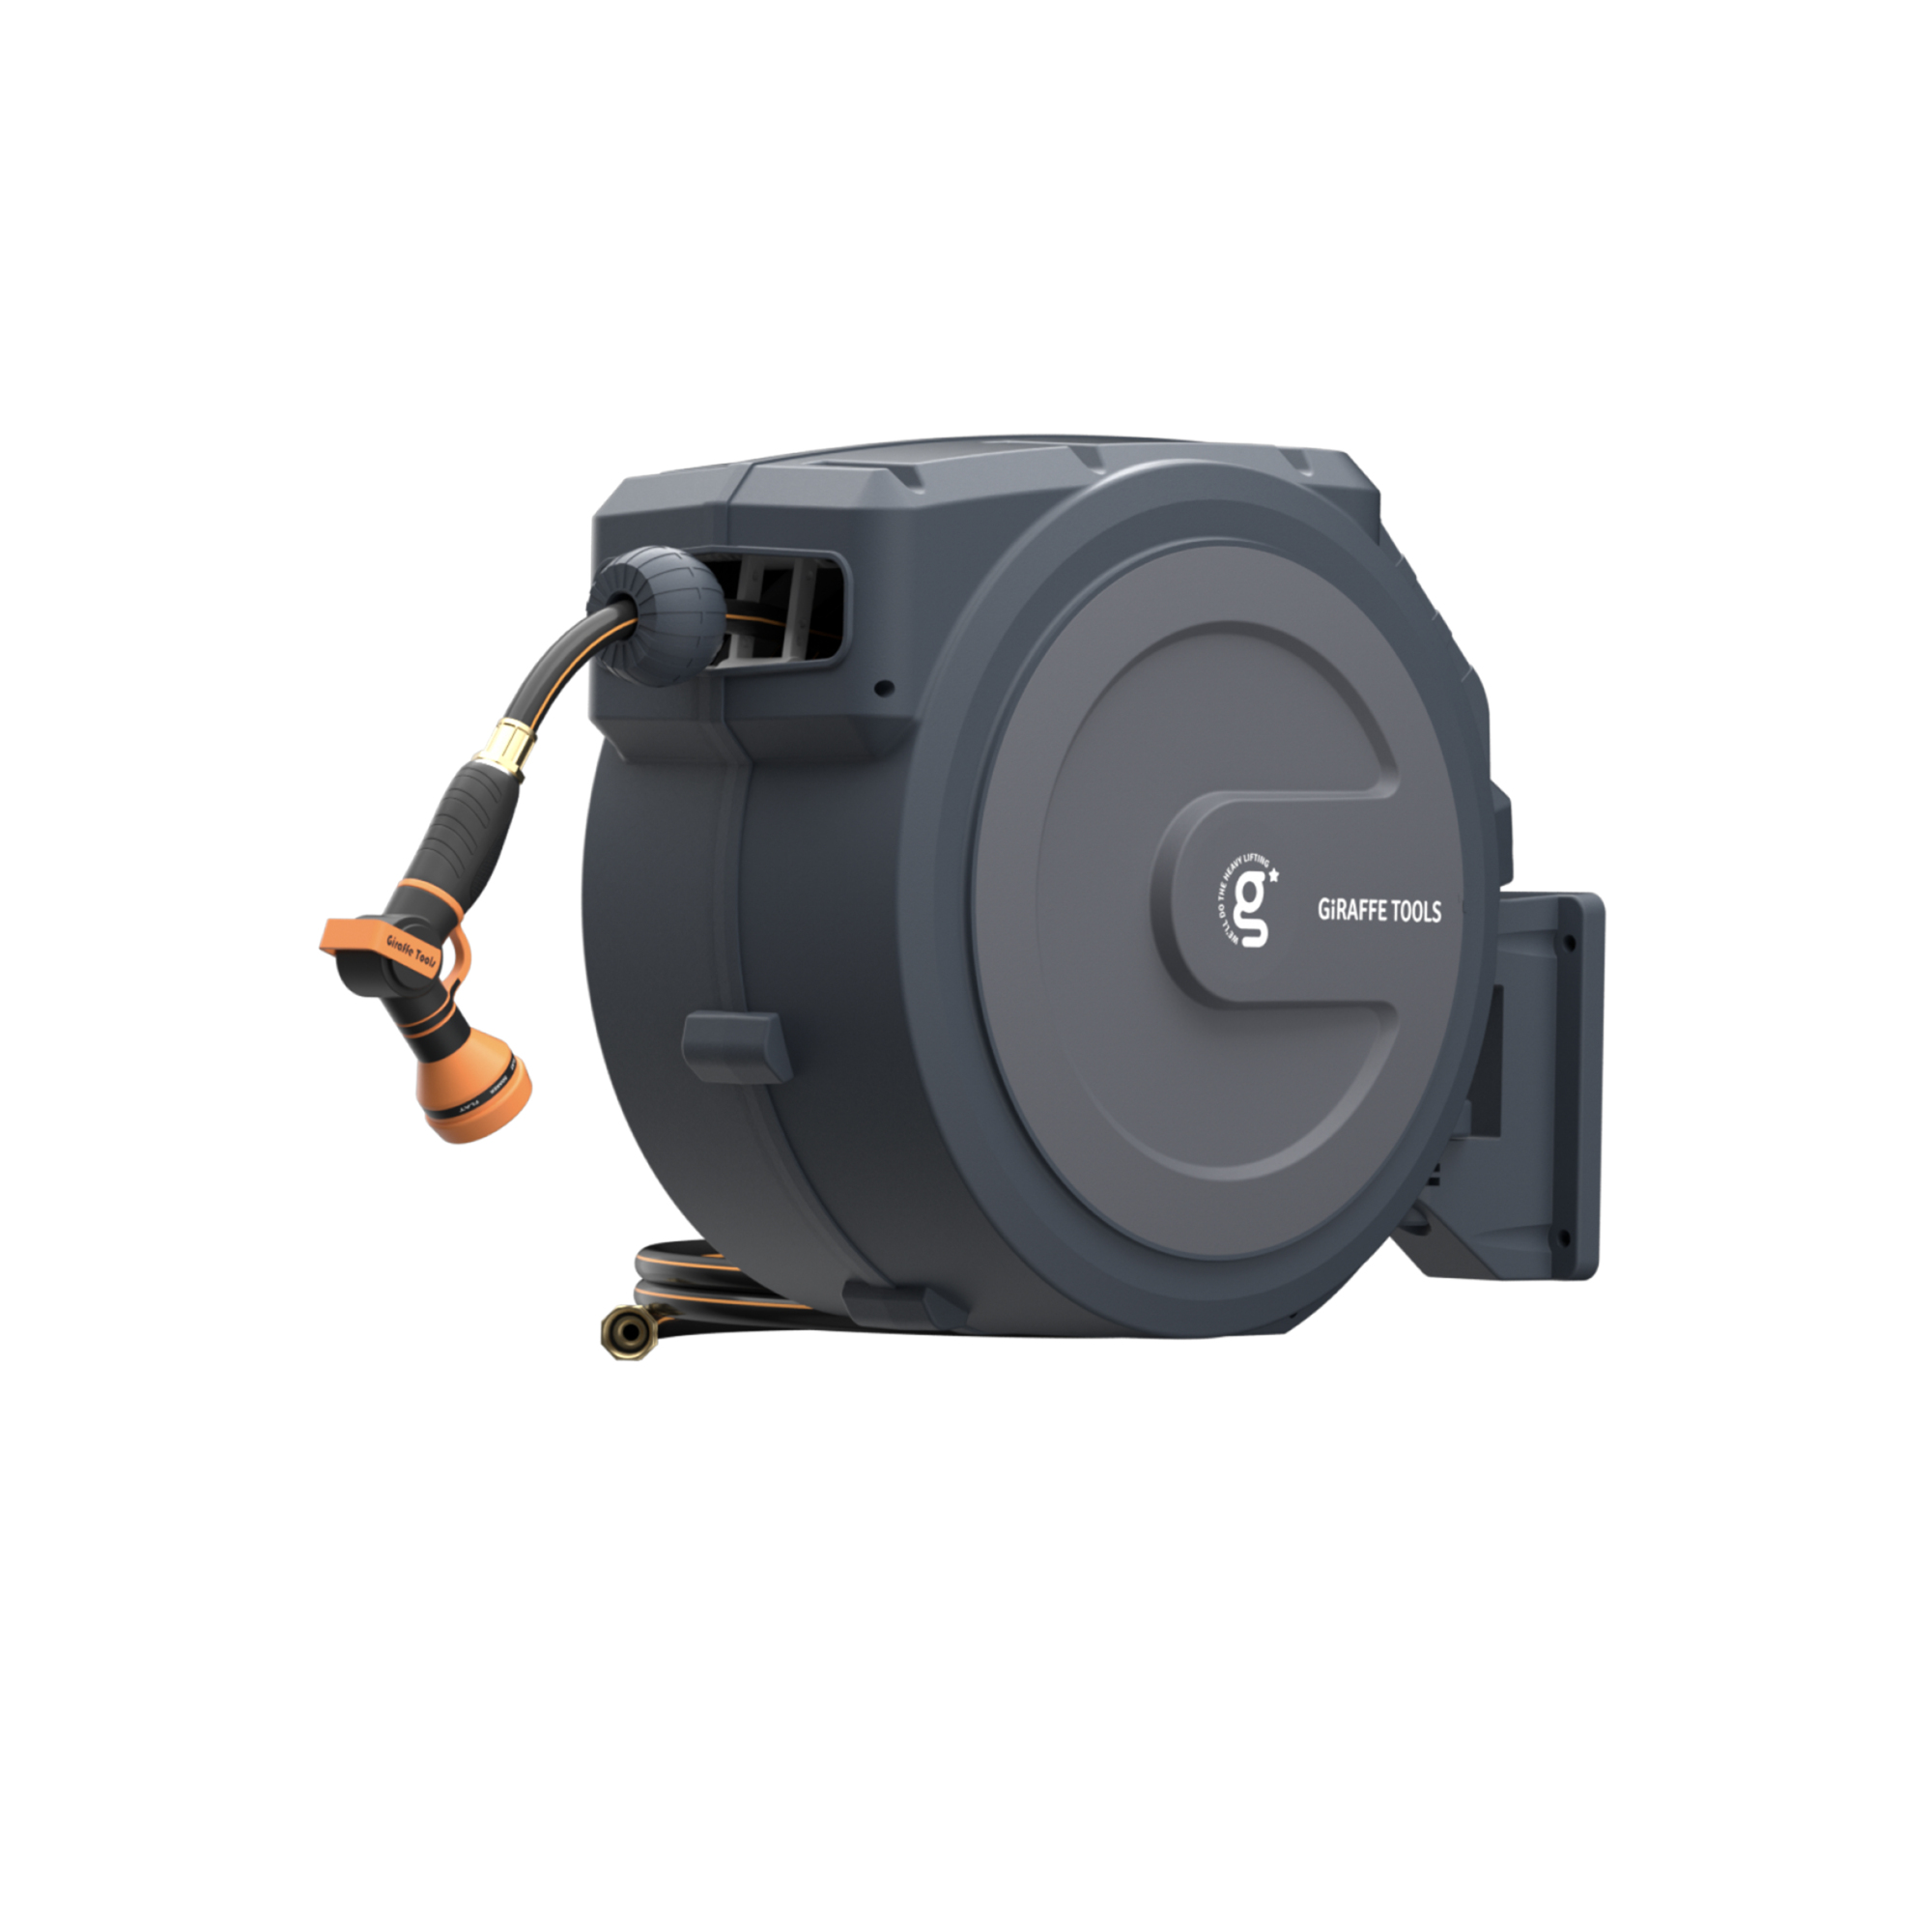 Giraffe Tools, Garden Hose Reel 1/2Inch 78ft.,Wall Mounted,DKGY, Hose Length Capacity 78 ft, Color Gray, Model AW2512US